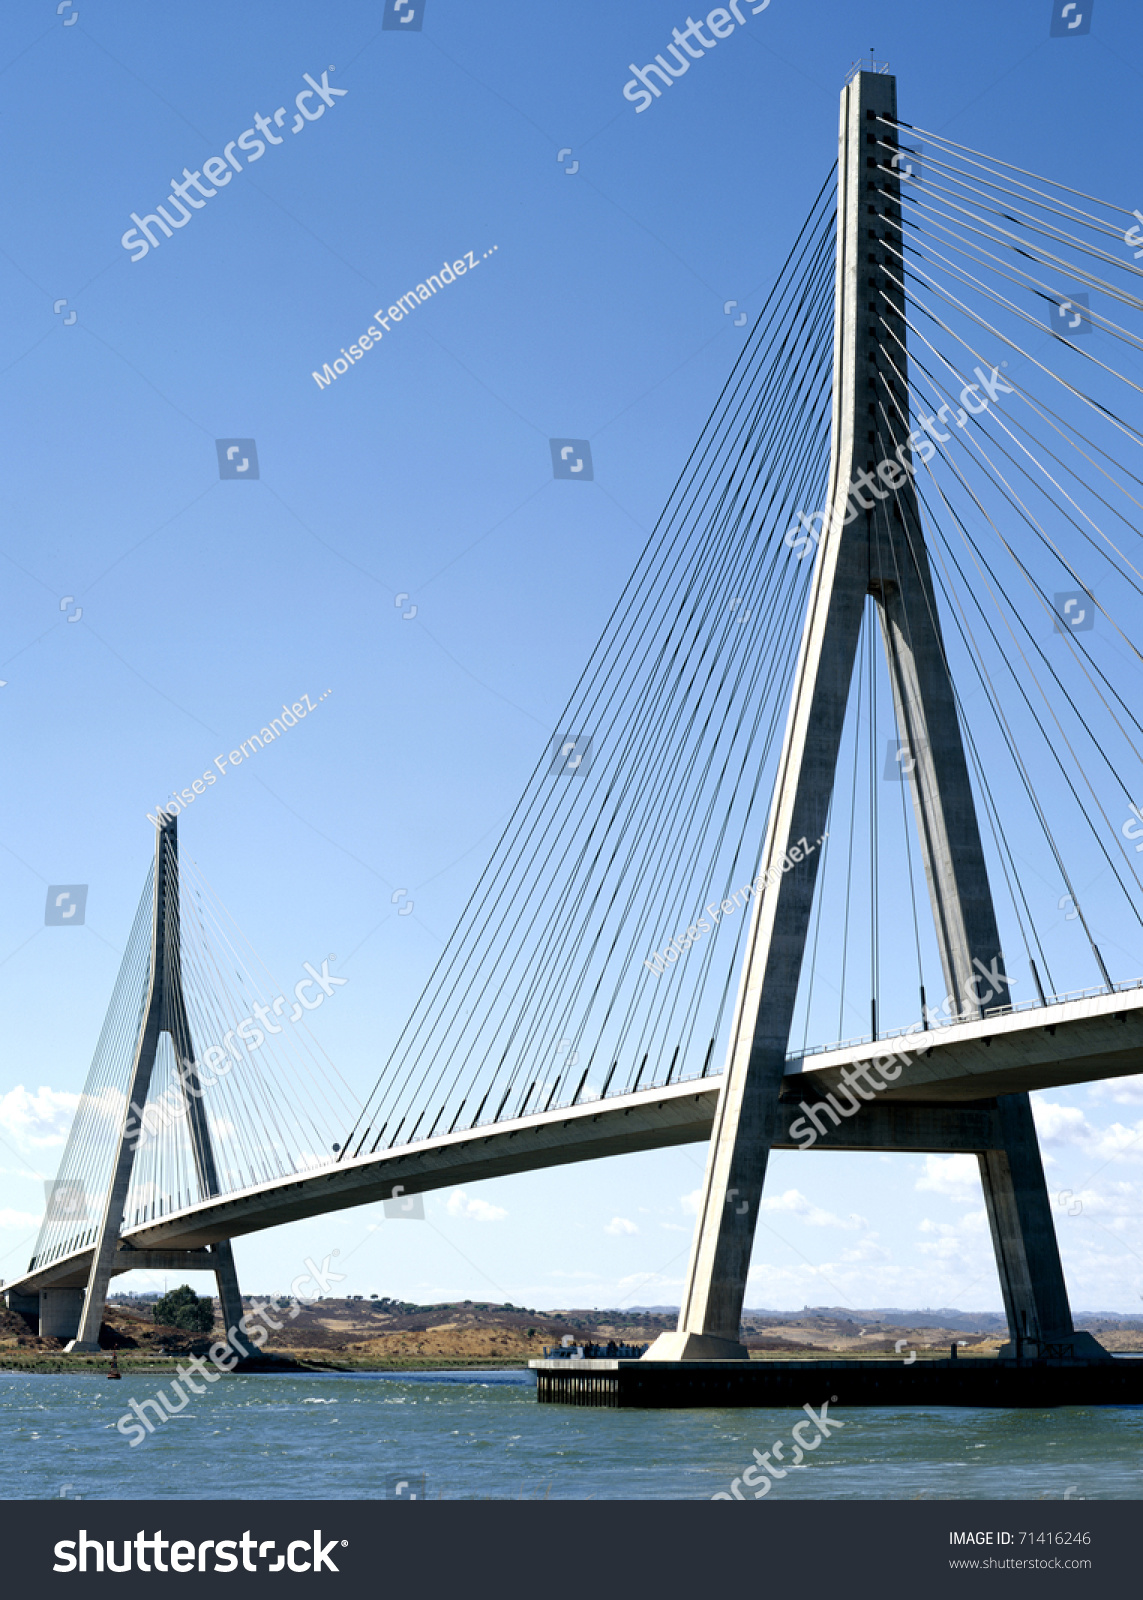 Suspension bridge over the river between Spain and Portugal #71416246